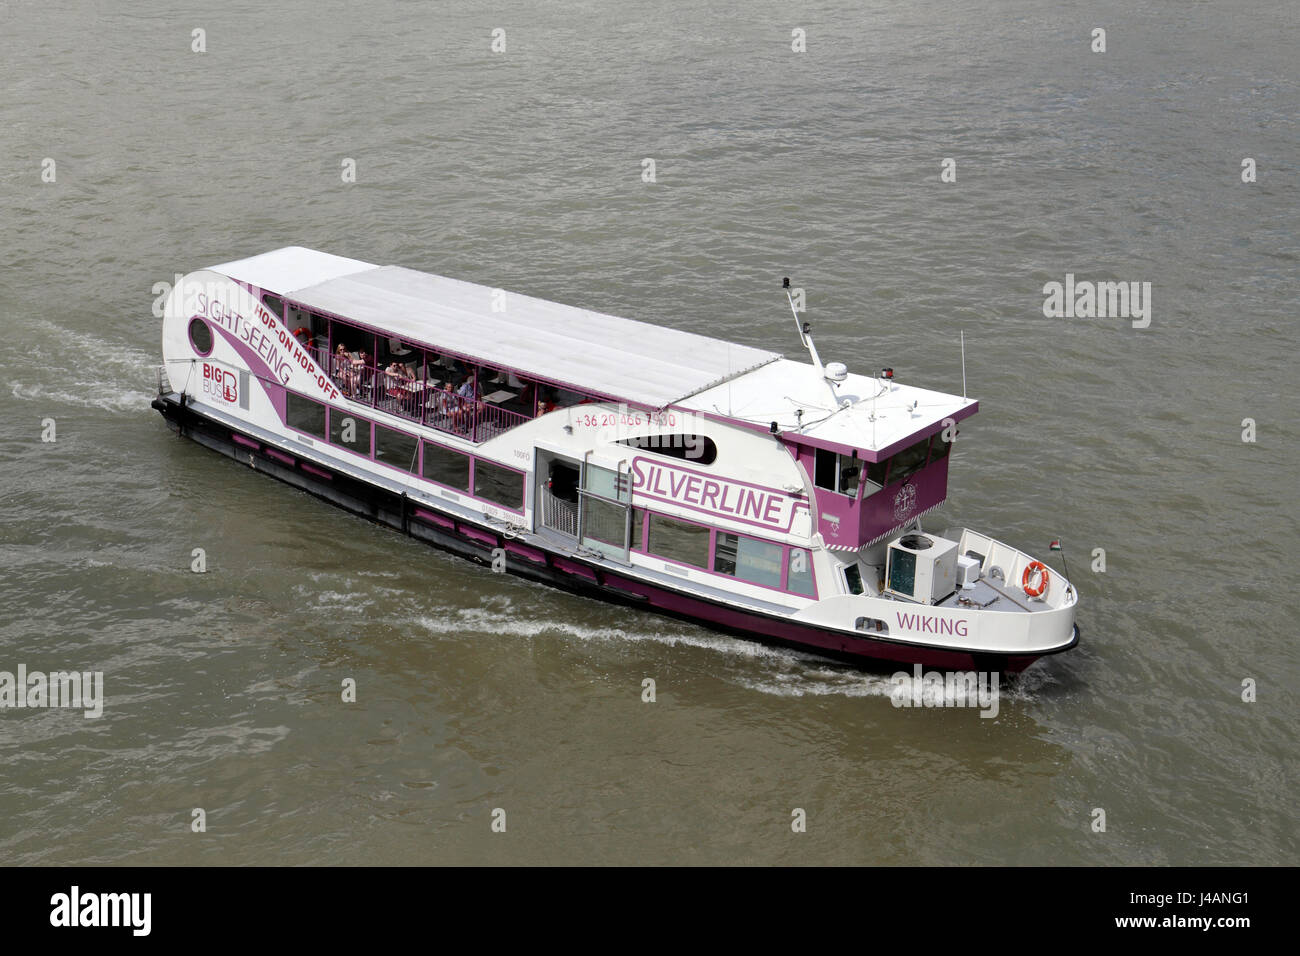 The 'Wiking', a Silverline tourist hop-on-hop-off tourist boat on the River Danube, Budapest, Hungary. Stock Photo